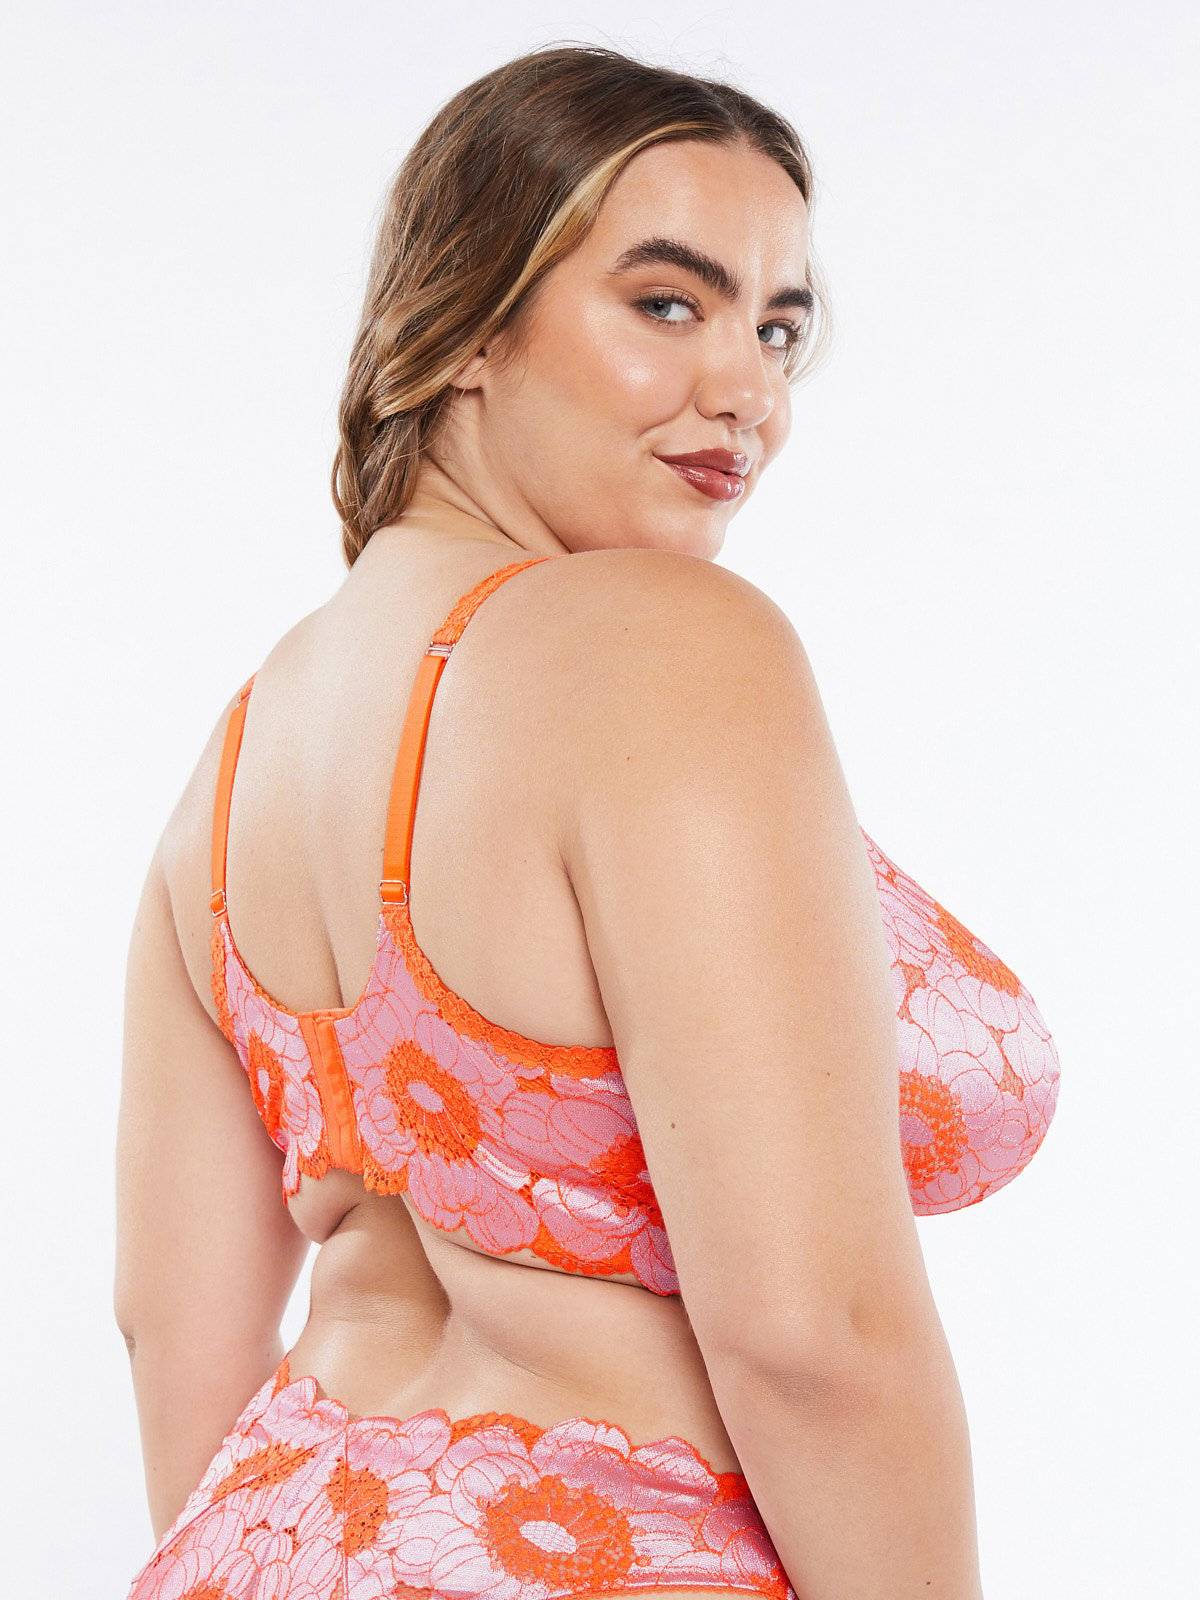 Dolled Up Unlined Lace Demi Bra in Multi & Orange & Red